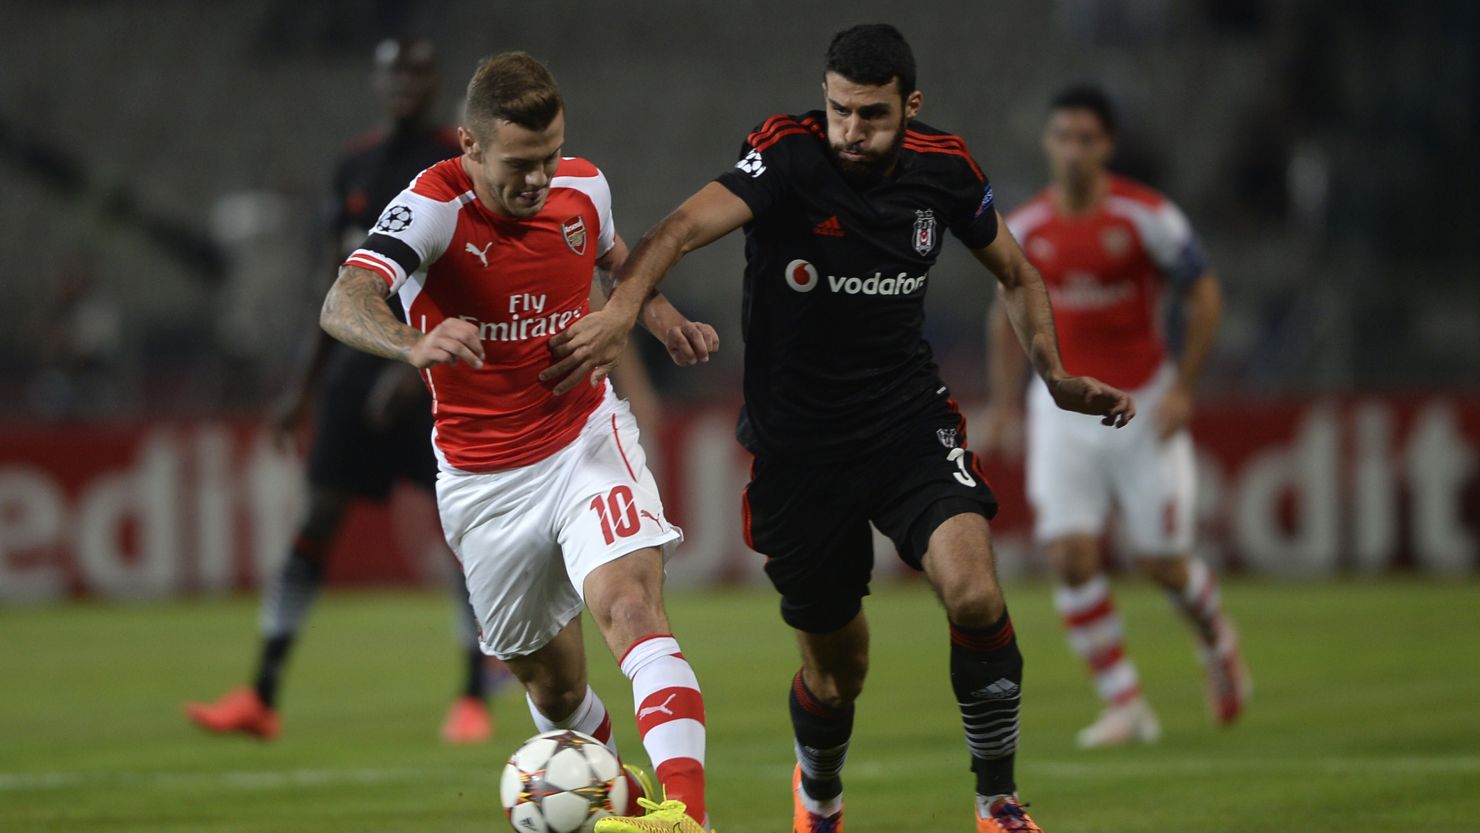 Arsenal and Besiktas will meet in north London next week for the second leg of their Champions League playoff tie.